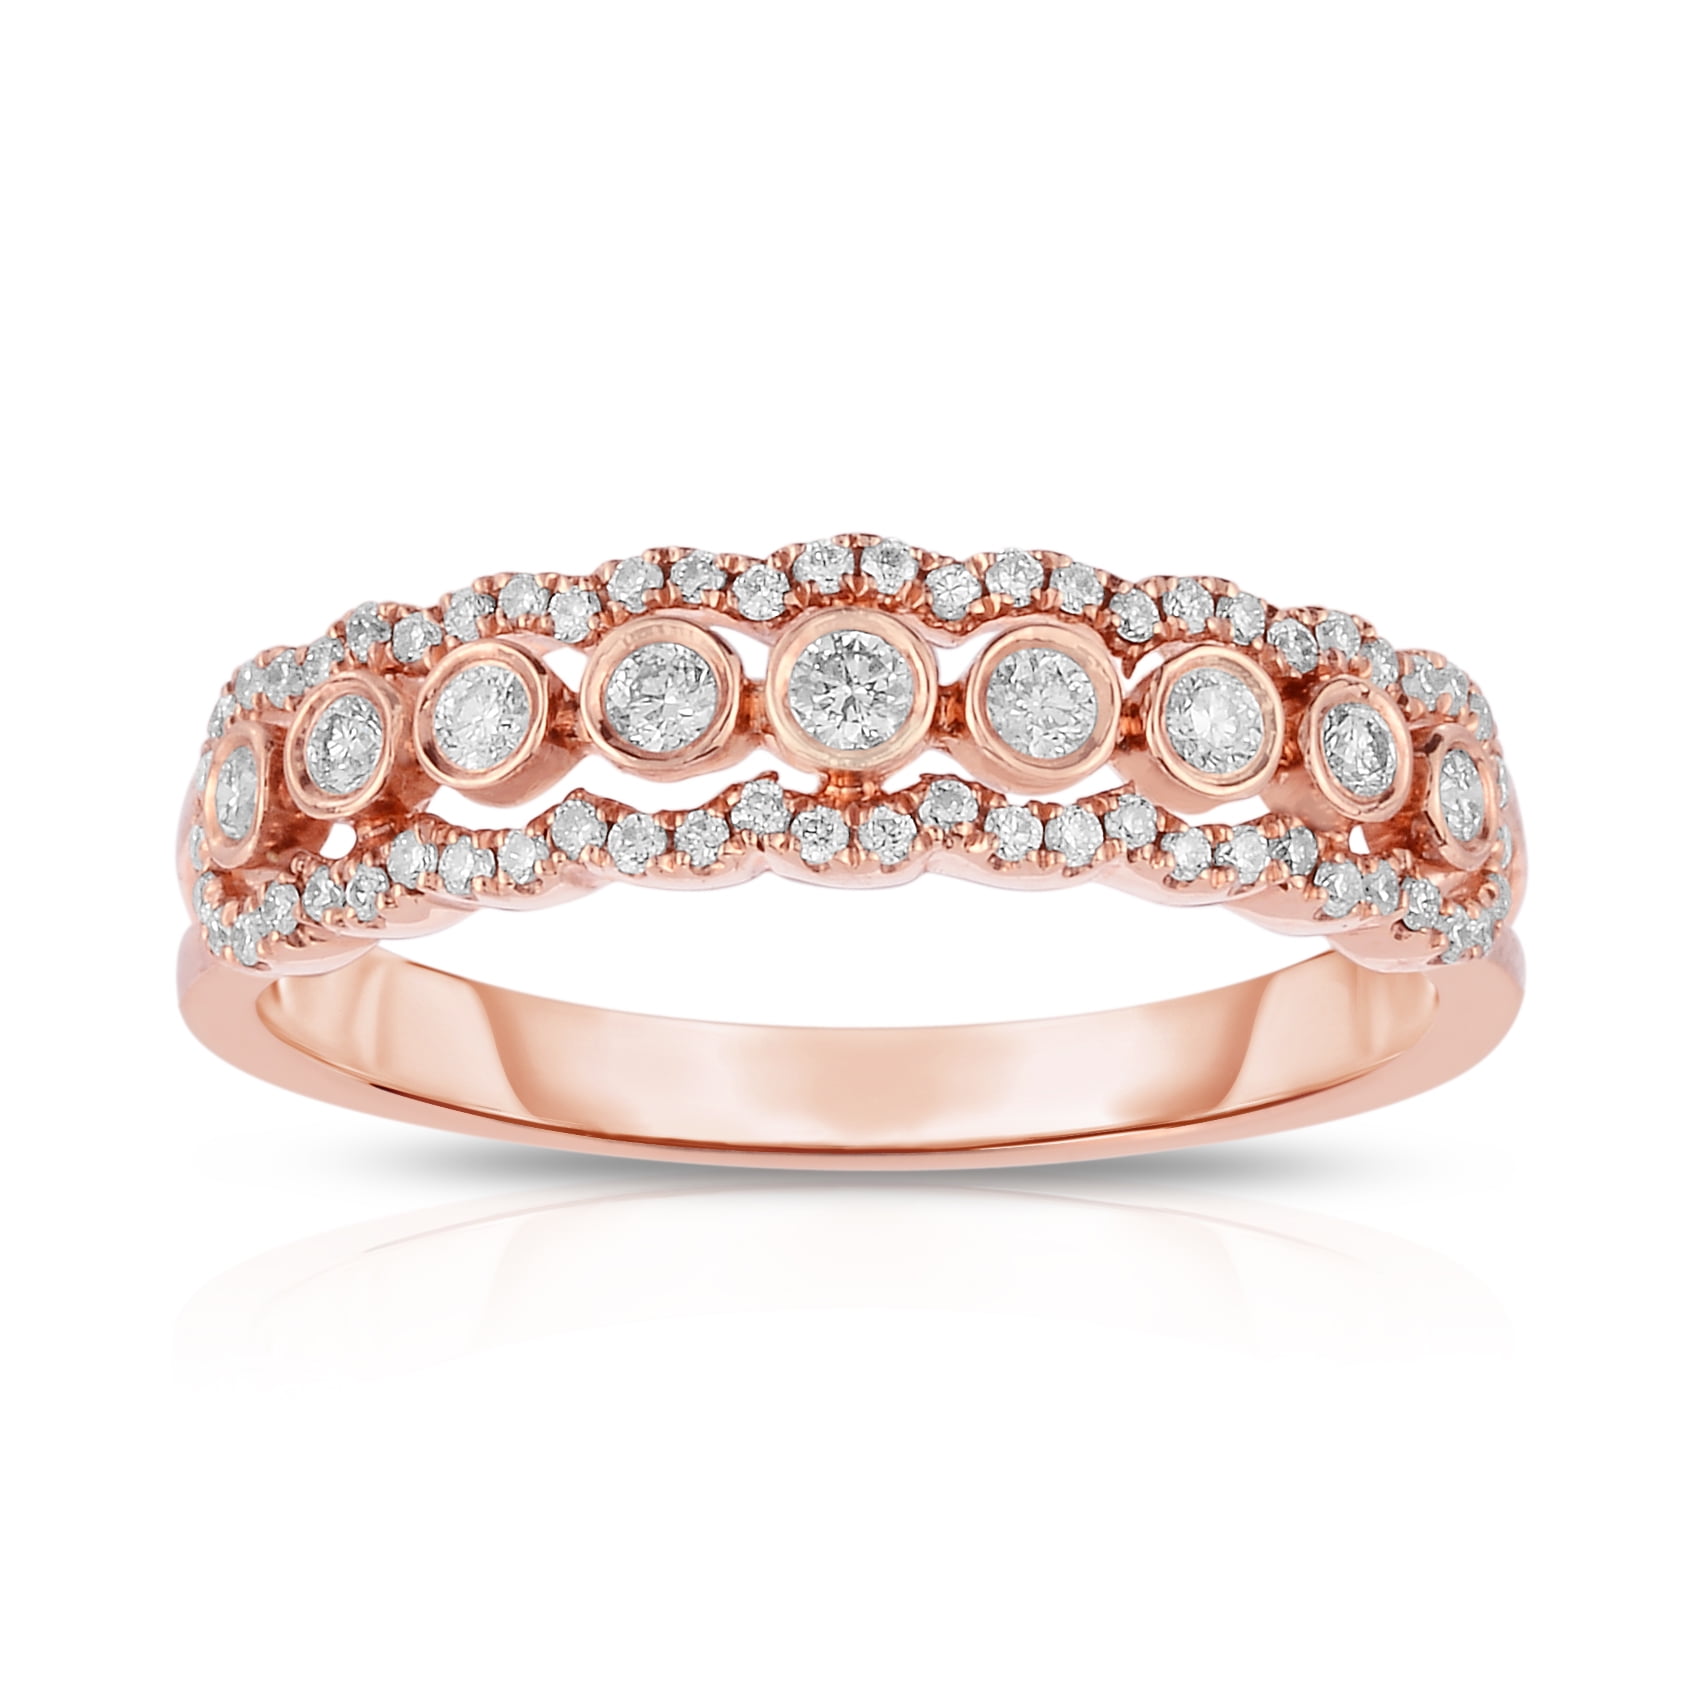 10k Rose Gold Diamond Single Row Fashion Ring Stackable Band Style 1/8 ct 